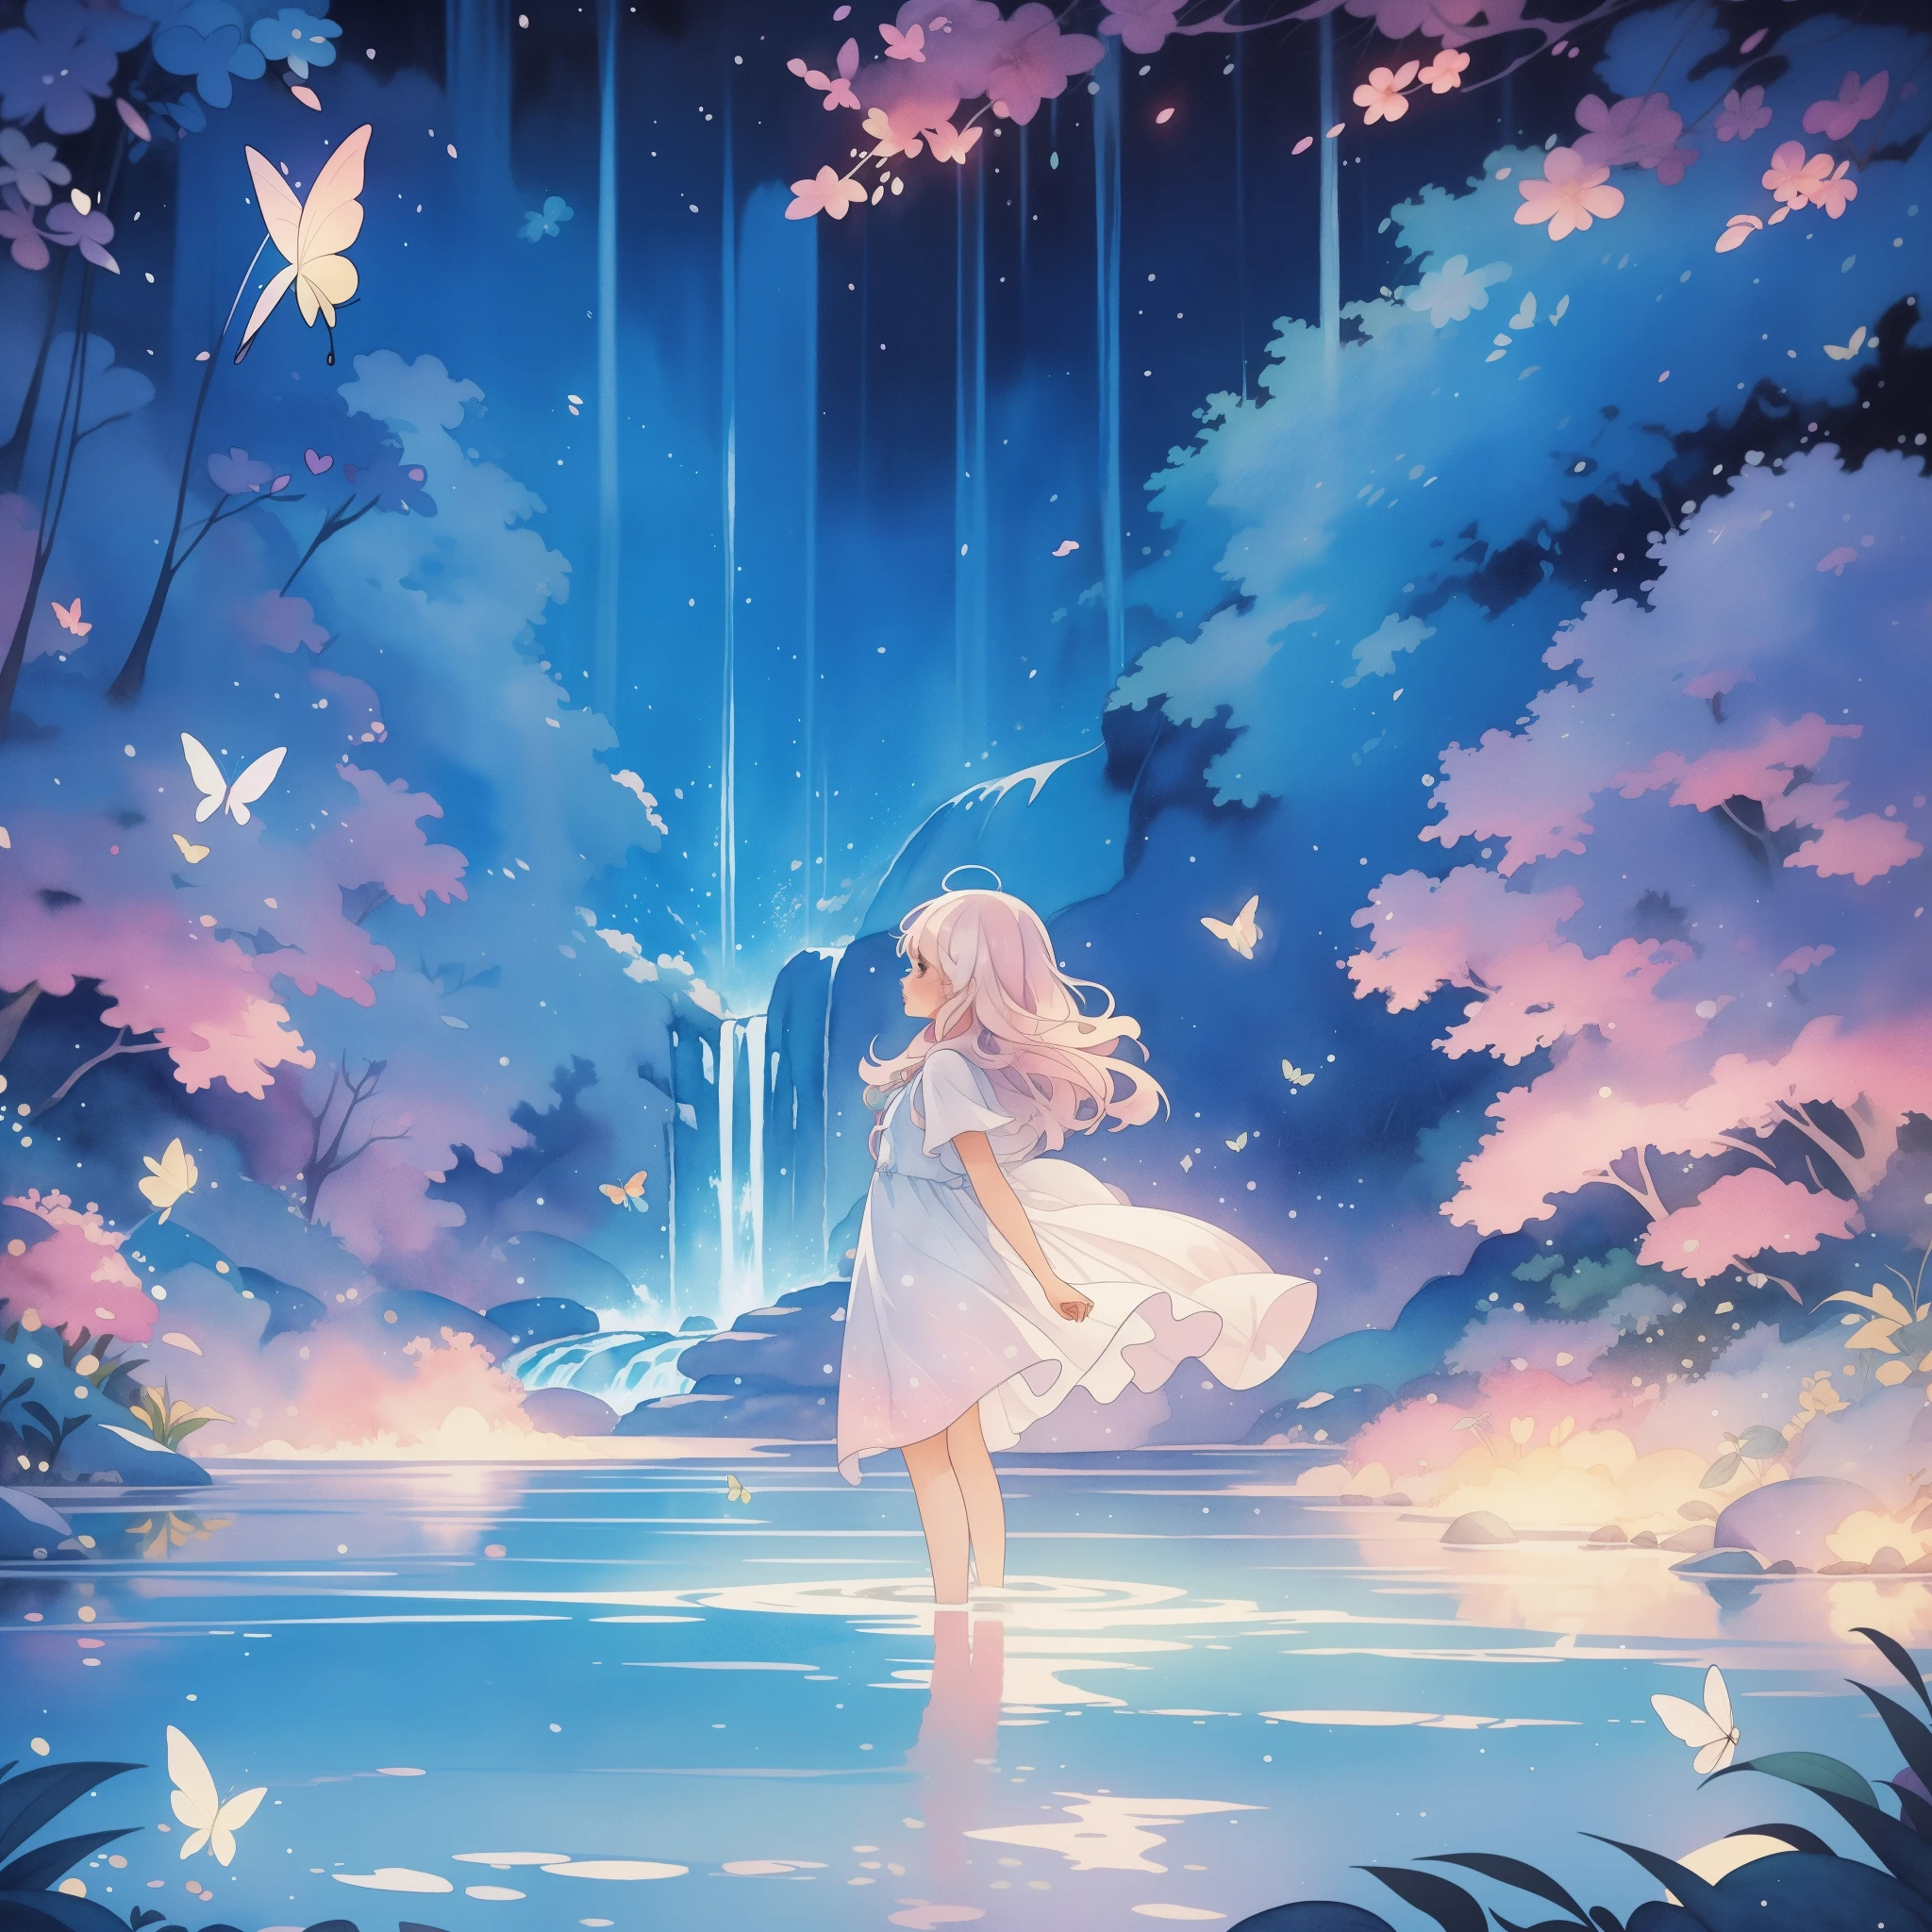 watercolor illustration, vibrant pastel colors, dreamy, colorful, whimsical, magical, masterpiece, best quality, sharp focus, intricately detailed environment, fine detail, 8k resolution, waterfall lagoon, (magical lagoon), (waterfall, lake), glowing lights, fireflies, glowing butterflies, fairy creatures, glowing fairies, beautiful girl in sparkling delicate white dress